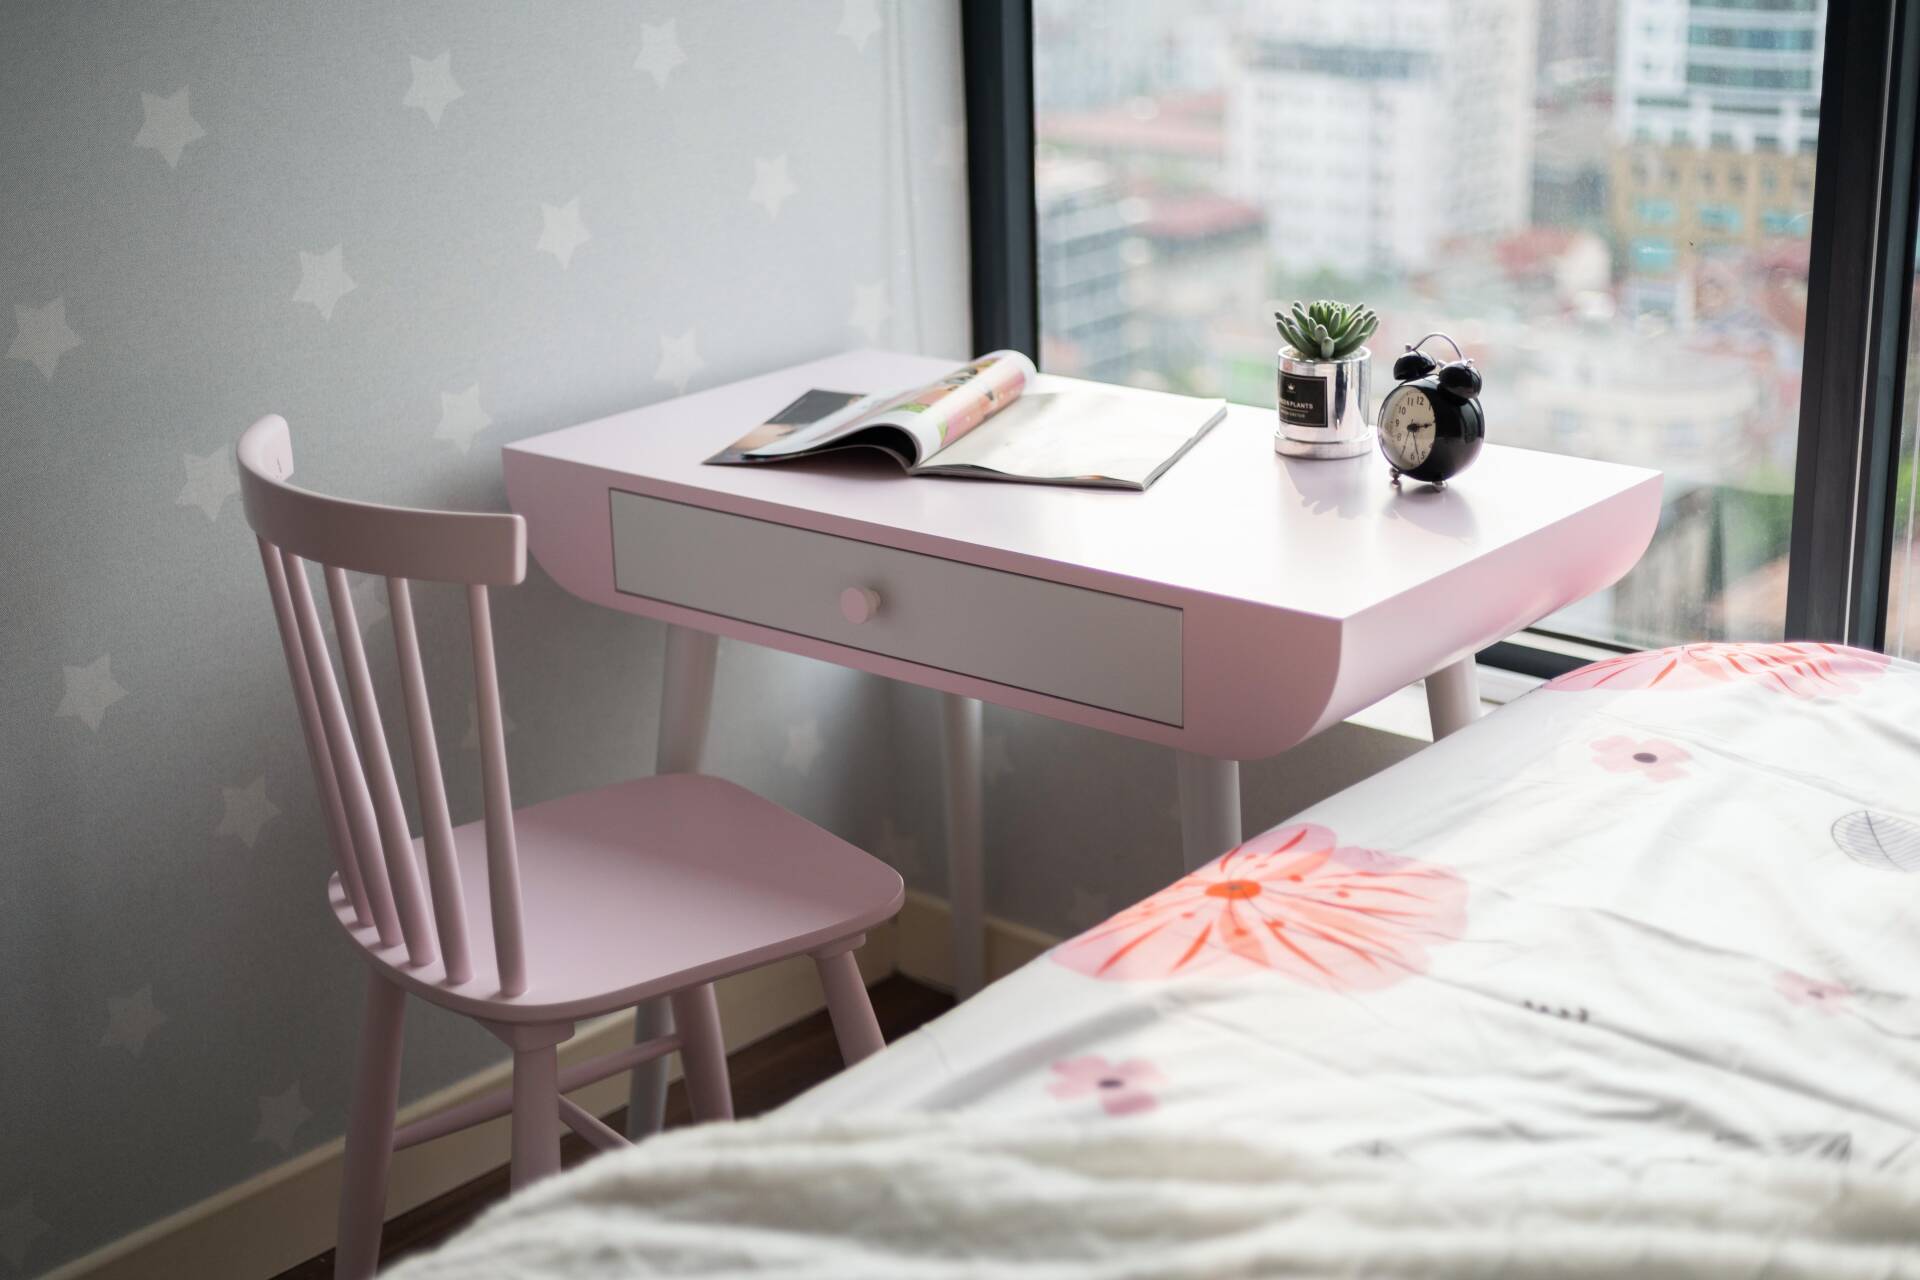 The beautiful little pink desk gives you inspiration to learn.